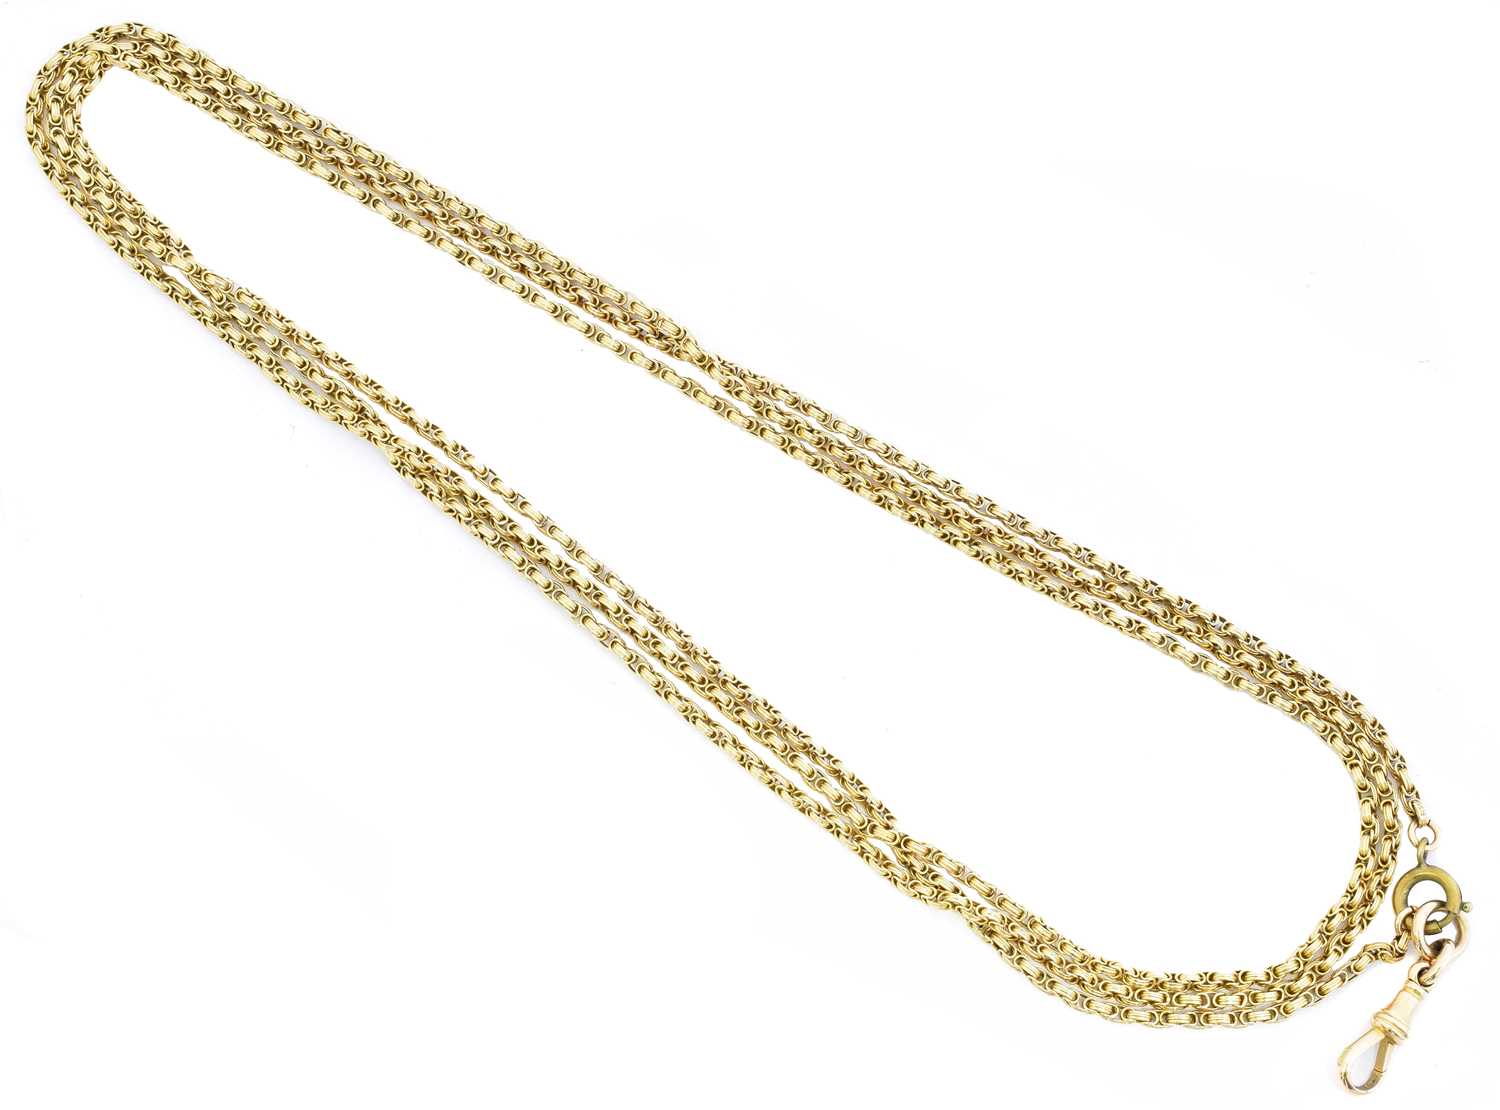 Lot 64 - An early 20th century 15ct gold longuard chain